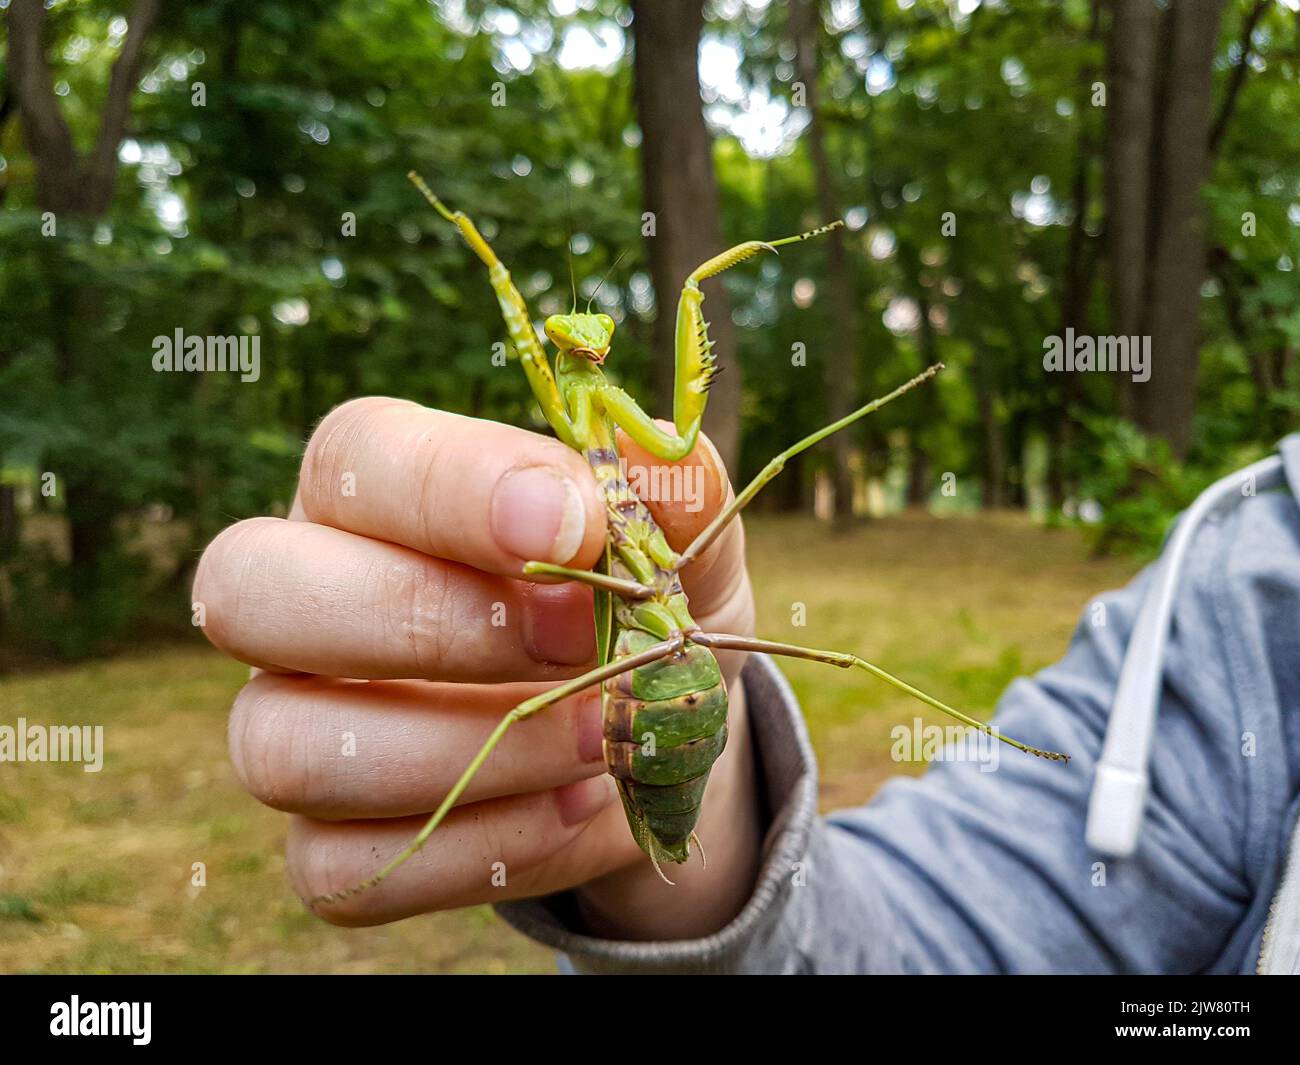 Green praying mantis in the hands close up Stock Photo